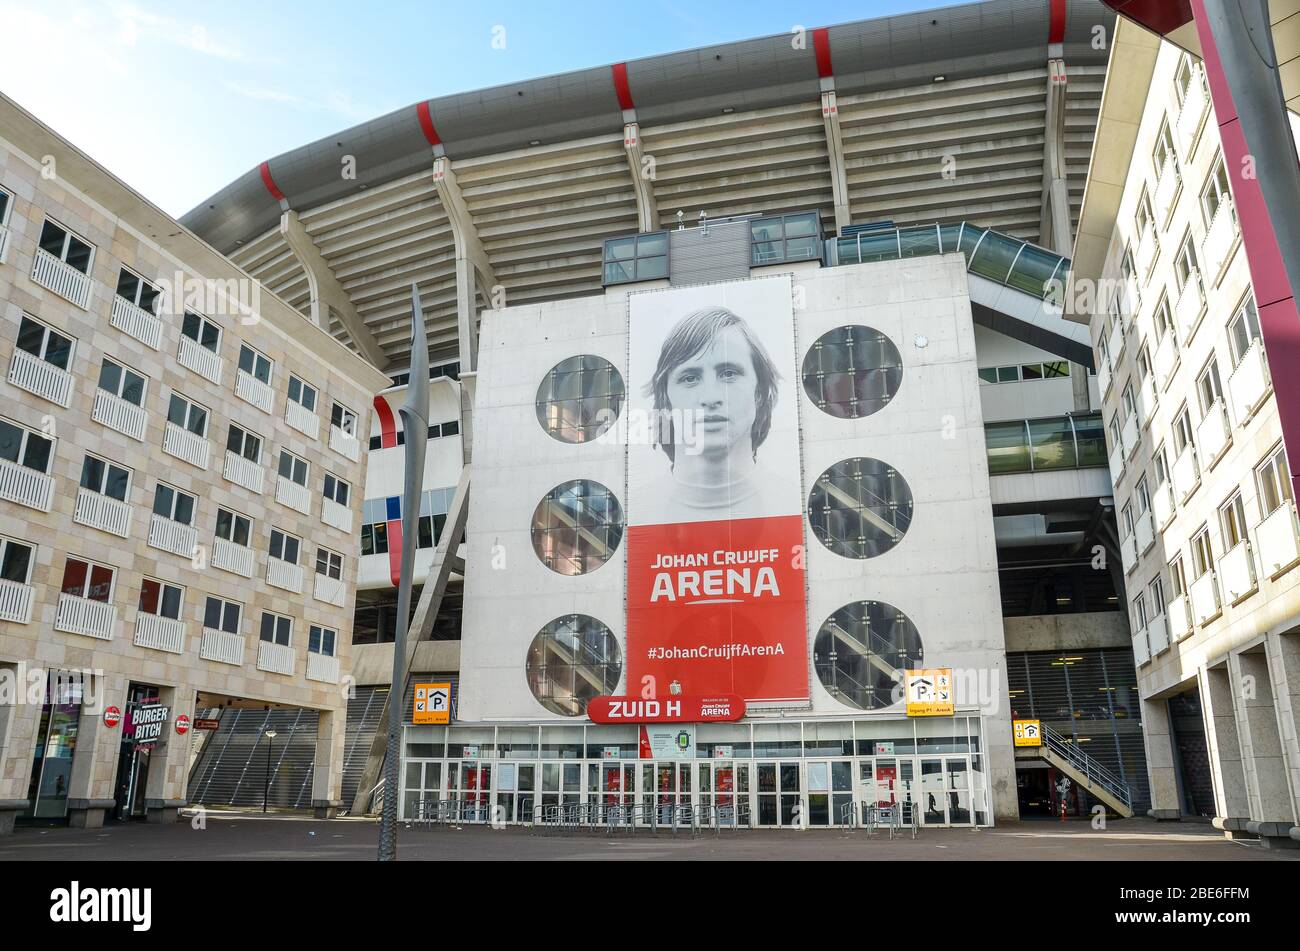 Amsterdam, Netherlands - April 27, 2019: Exterior of the Johan Cruijff Arena from the Zuid H entrance. Home stadium of Ajax Amsterdam football team. Bilboard of former player Cruijff on the arena. Stock Photo